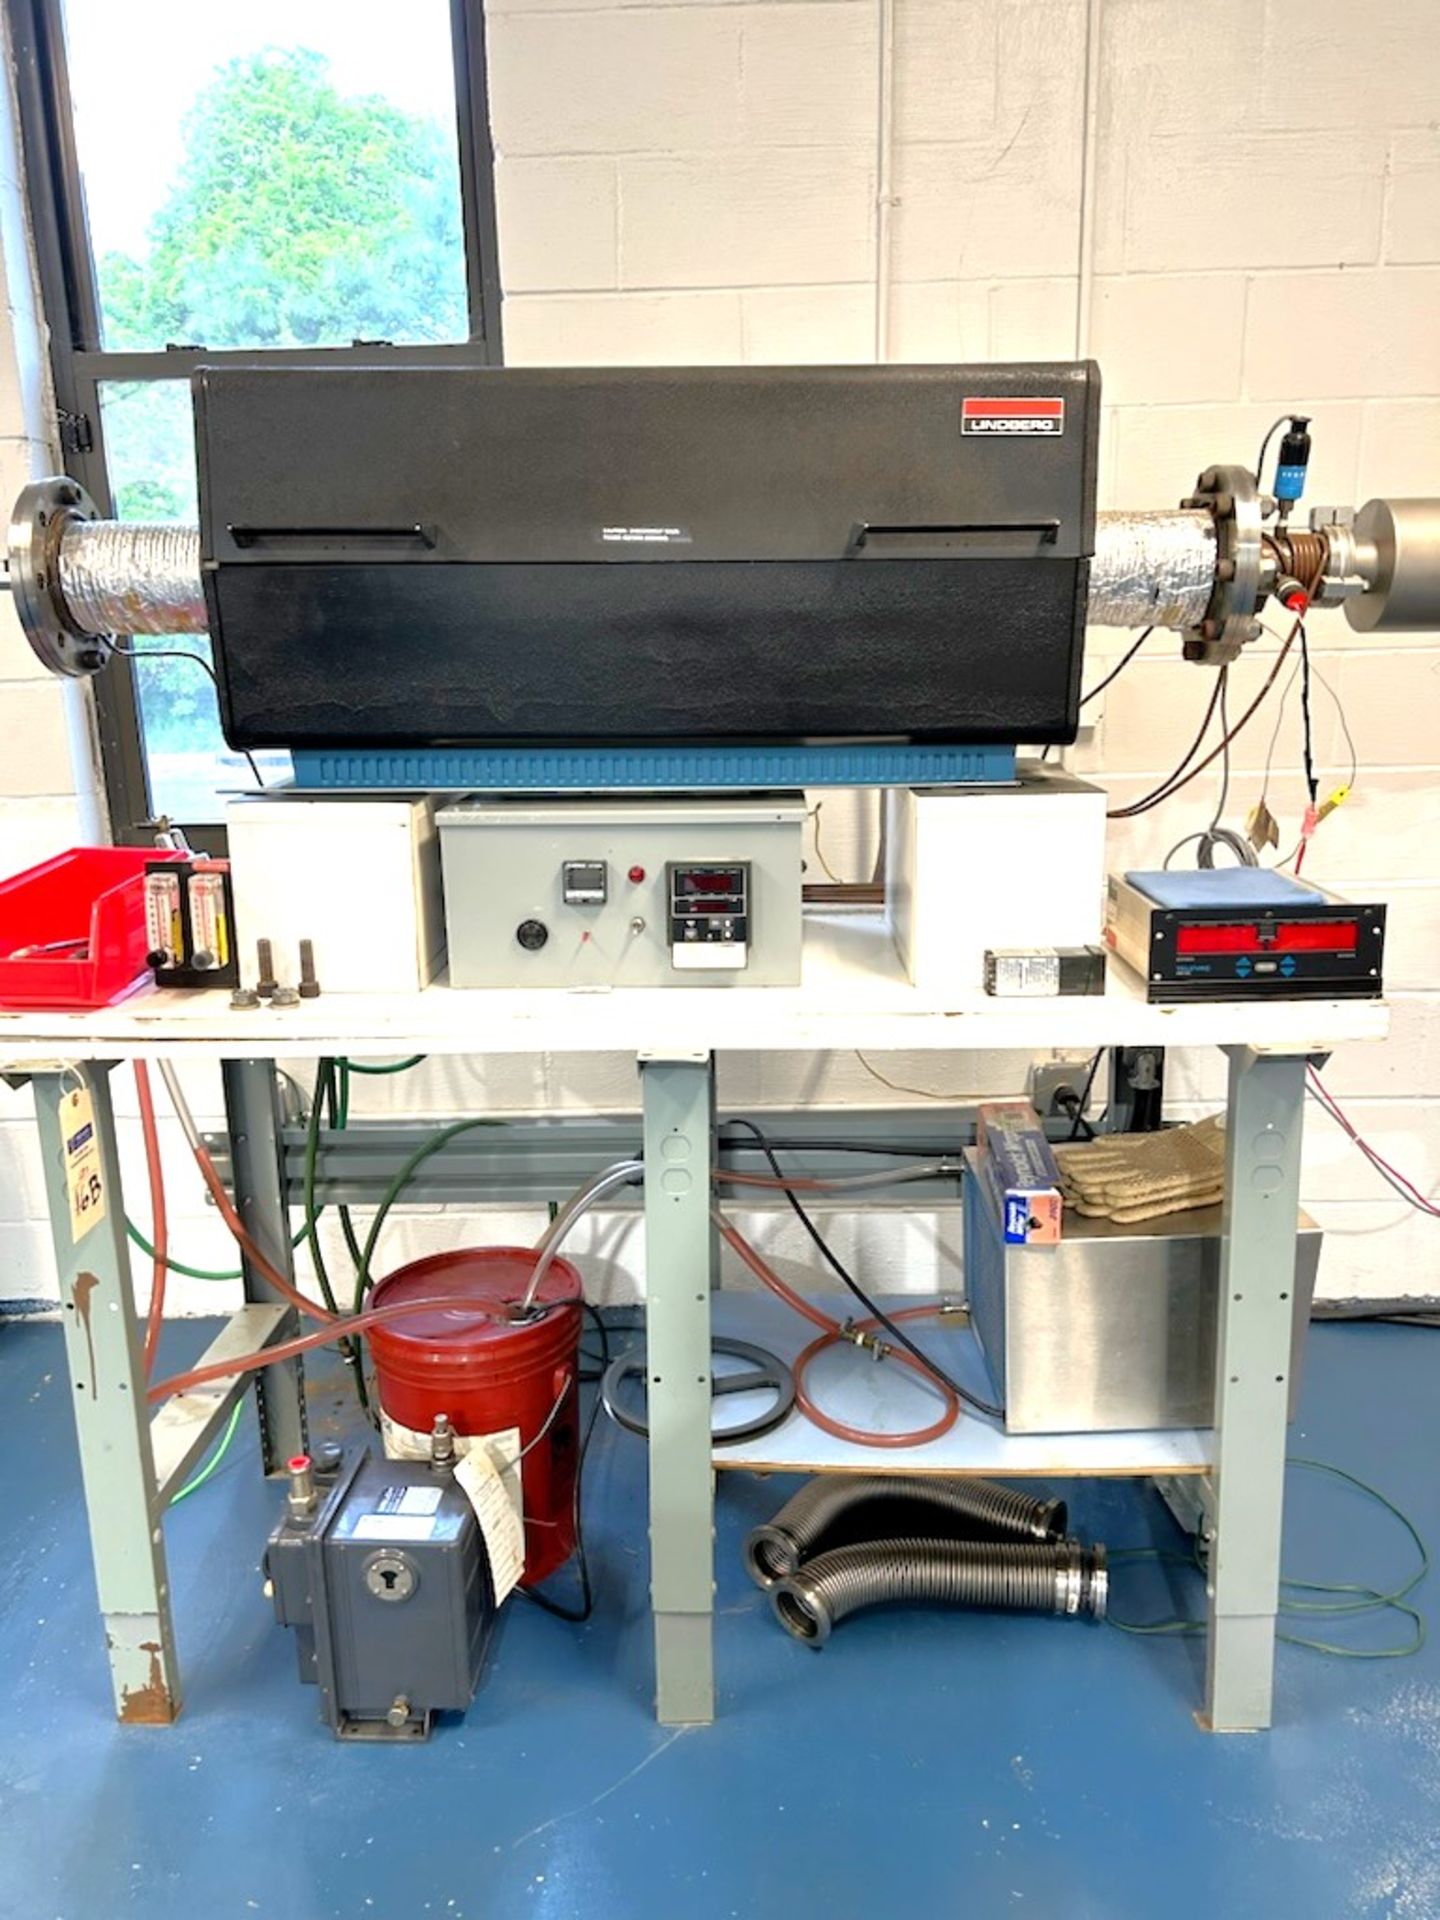 Vacuum Oven Measuring Instrumentation Machine built by Evey Engineering - Image 2 of 10